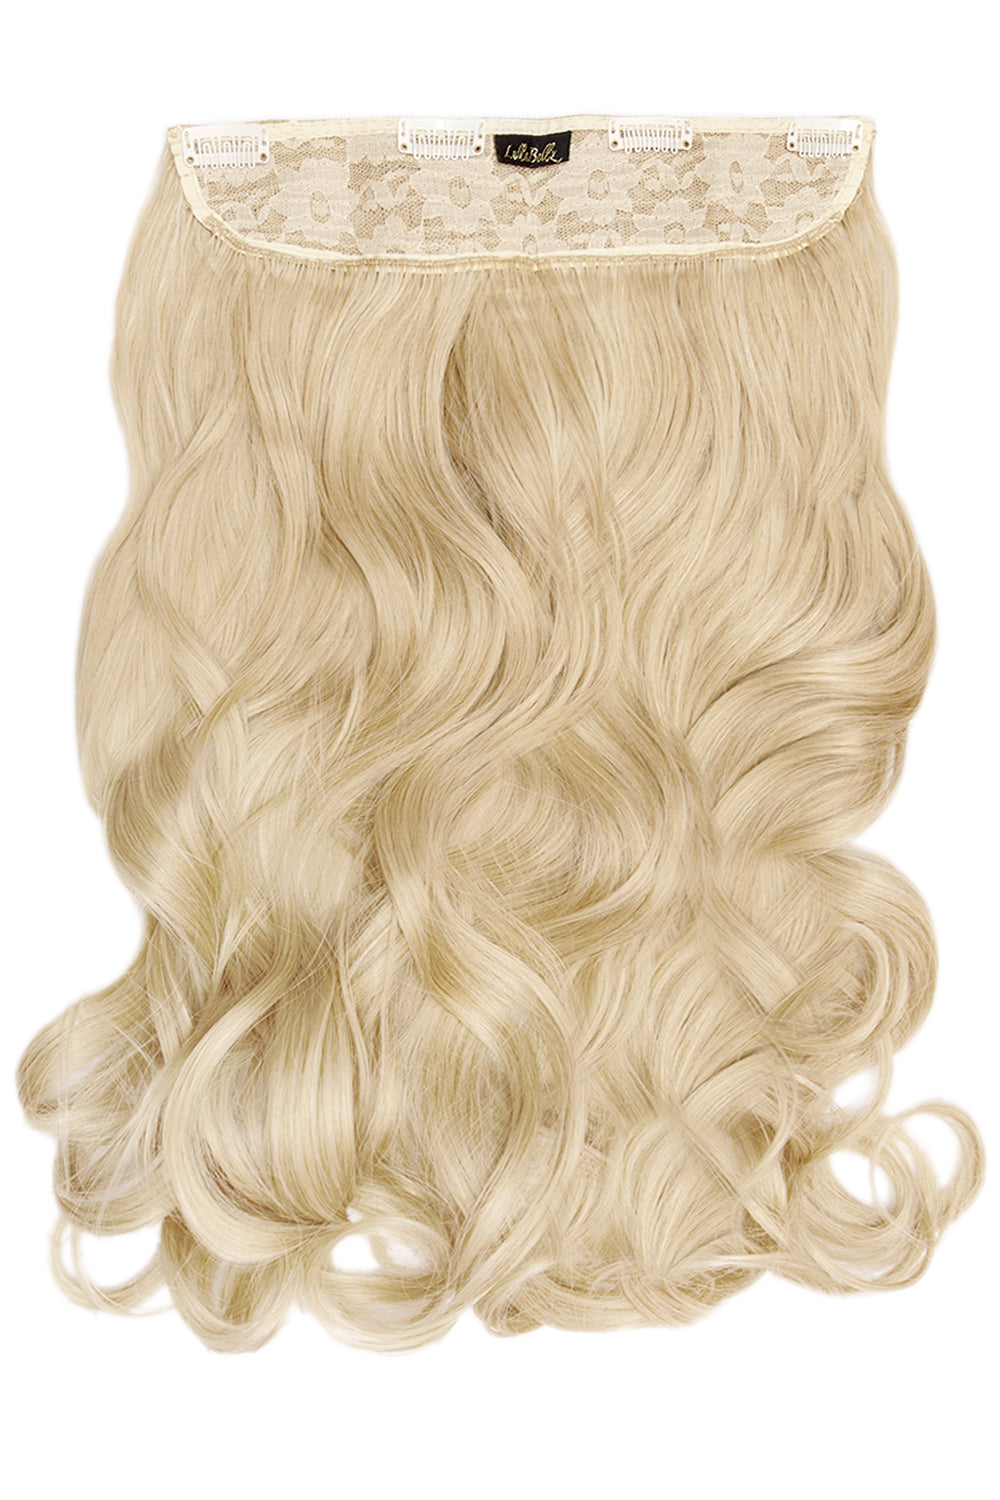 Thick 20" 1 Piece Curly Clip In Hair Extensions - LullaBellz - Light Blonde